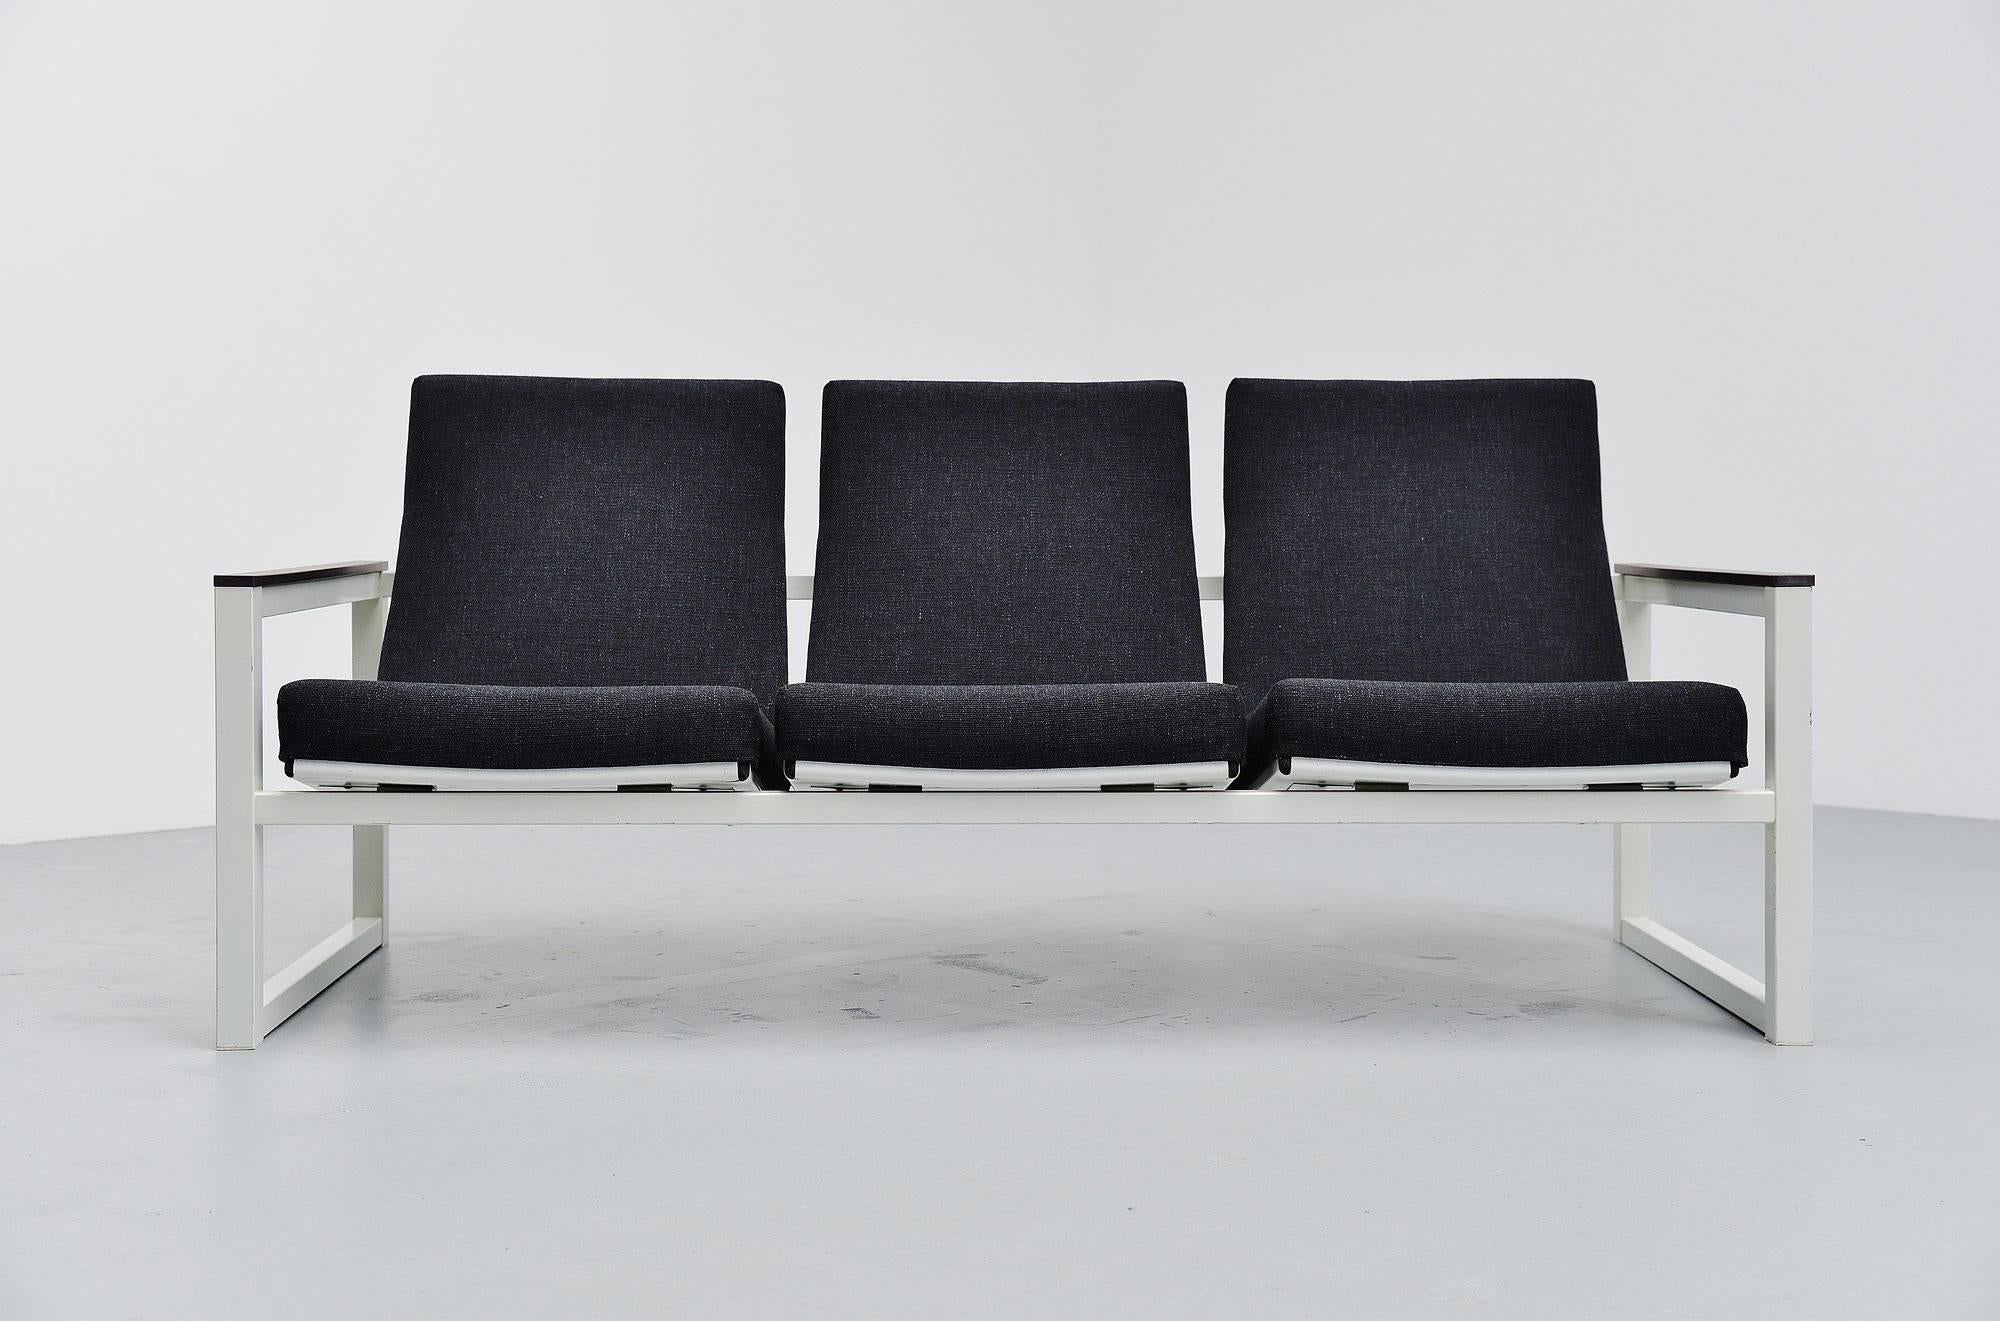 Very nice Industrial lounge sofa designed by a duo of Industrial designers. The sofa was designed by Tjerk Reijenga for Pilastro 1965, the seating structure was designed by Friso Kramer for Ahrend de Cirkel 1959. The chair is also stamped Ahrend de